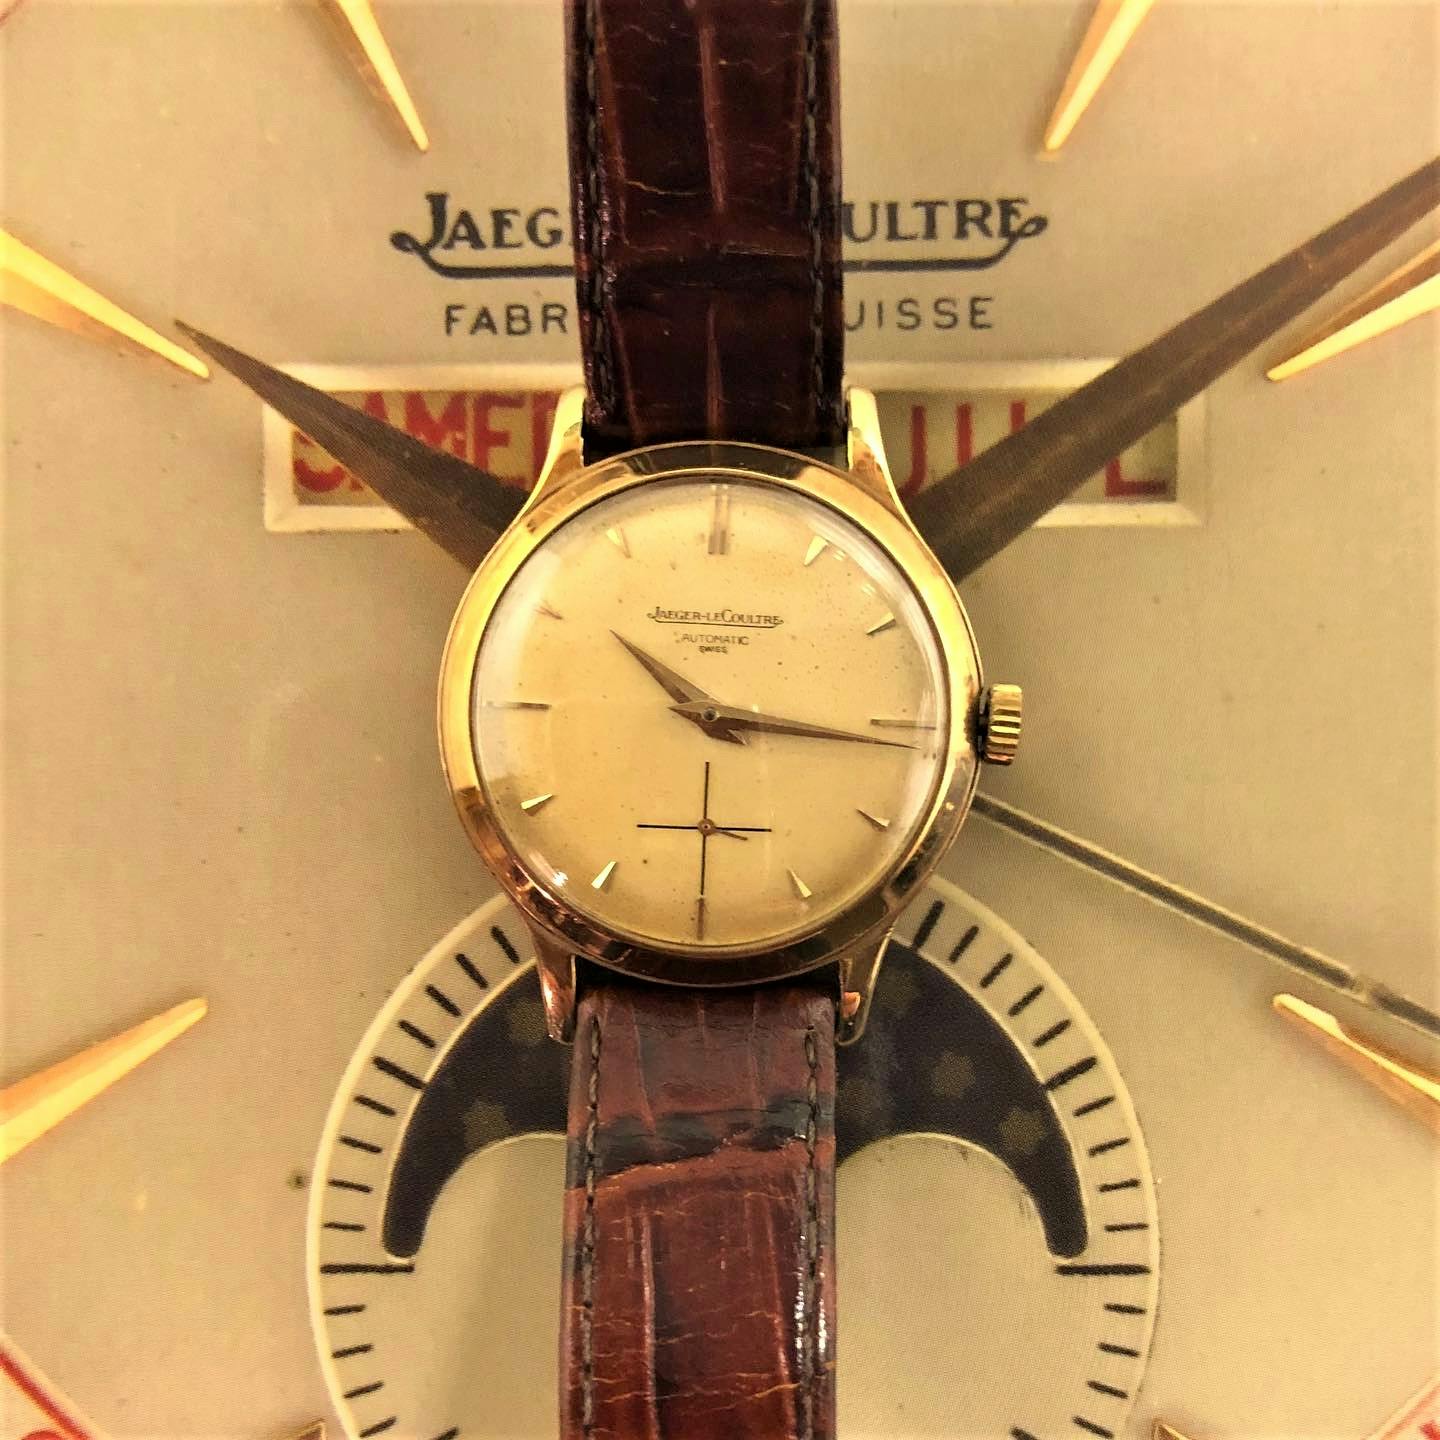 Gold Jaeger LeCoultre Automatic Men's Watch from the 1950s